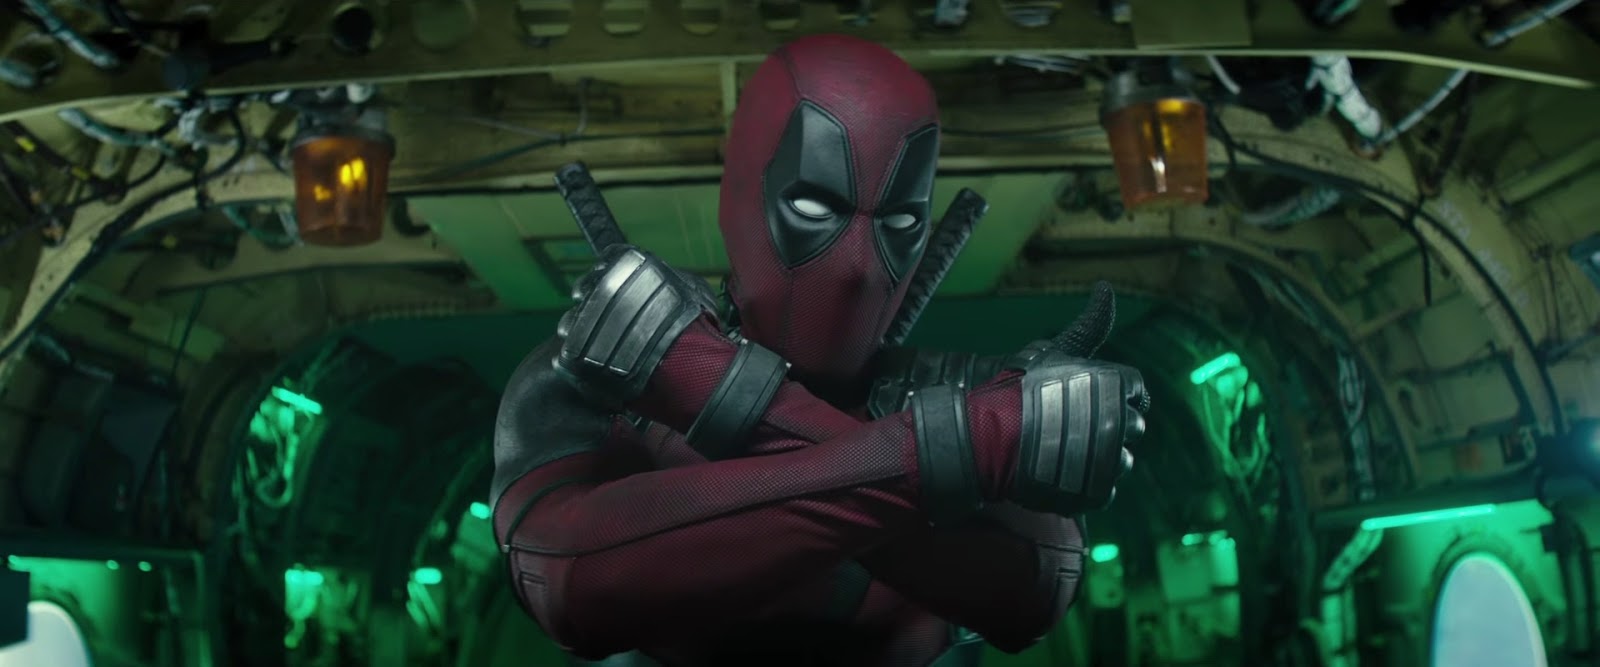 MOVIES: Deadpool 2 - Review